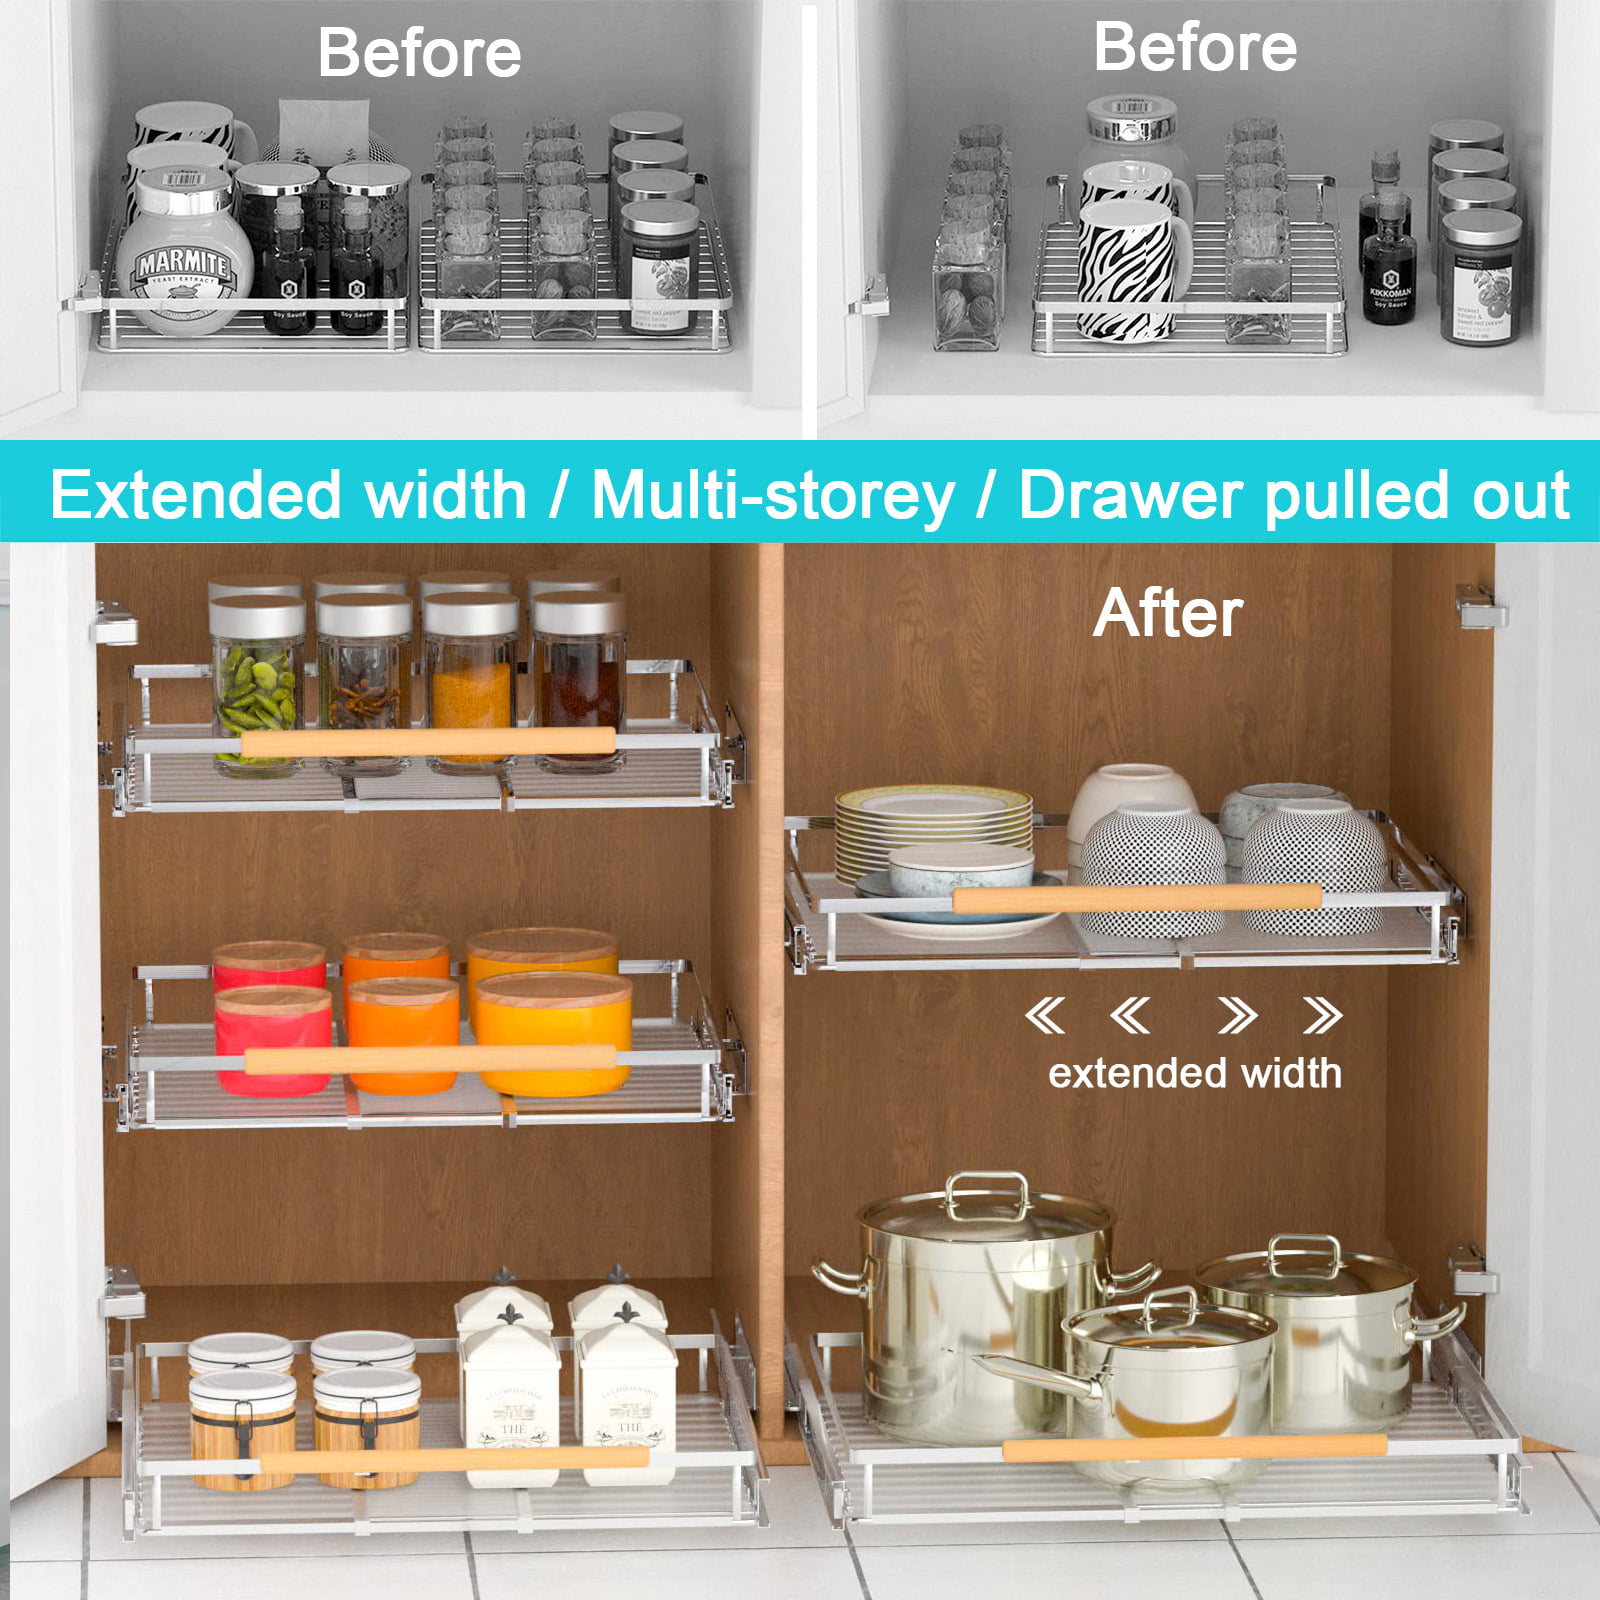 Pull out Cabinet Organizer, Expandable(11.7-19.7) Heavy Duty